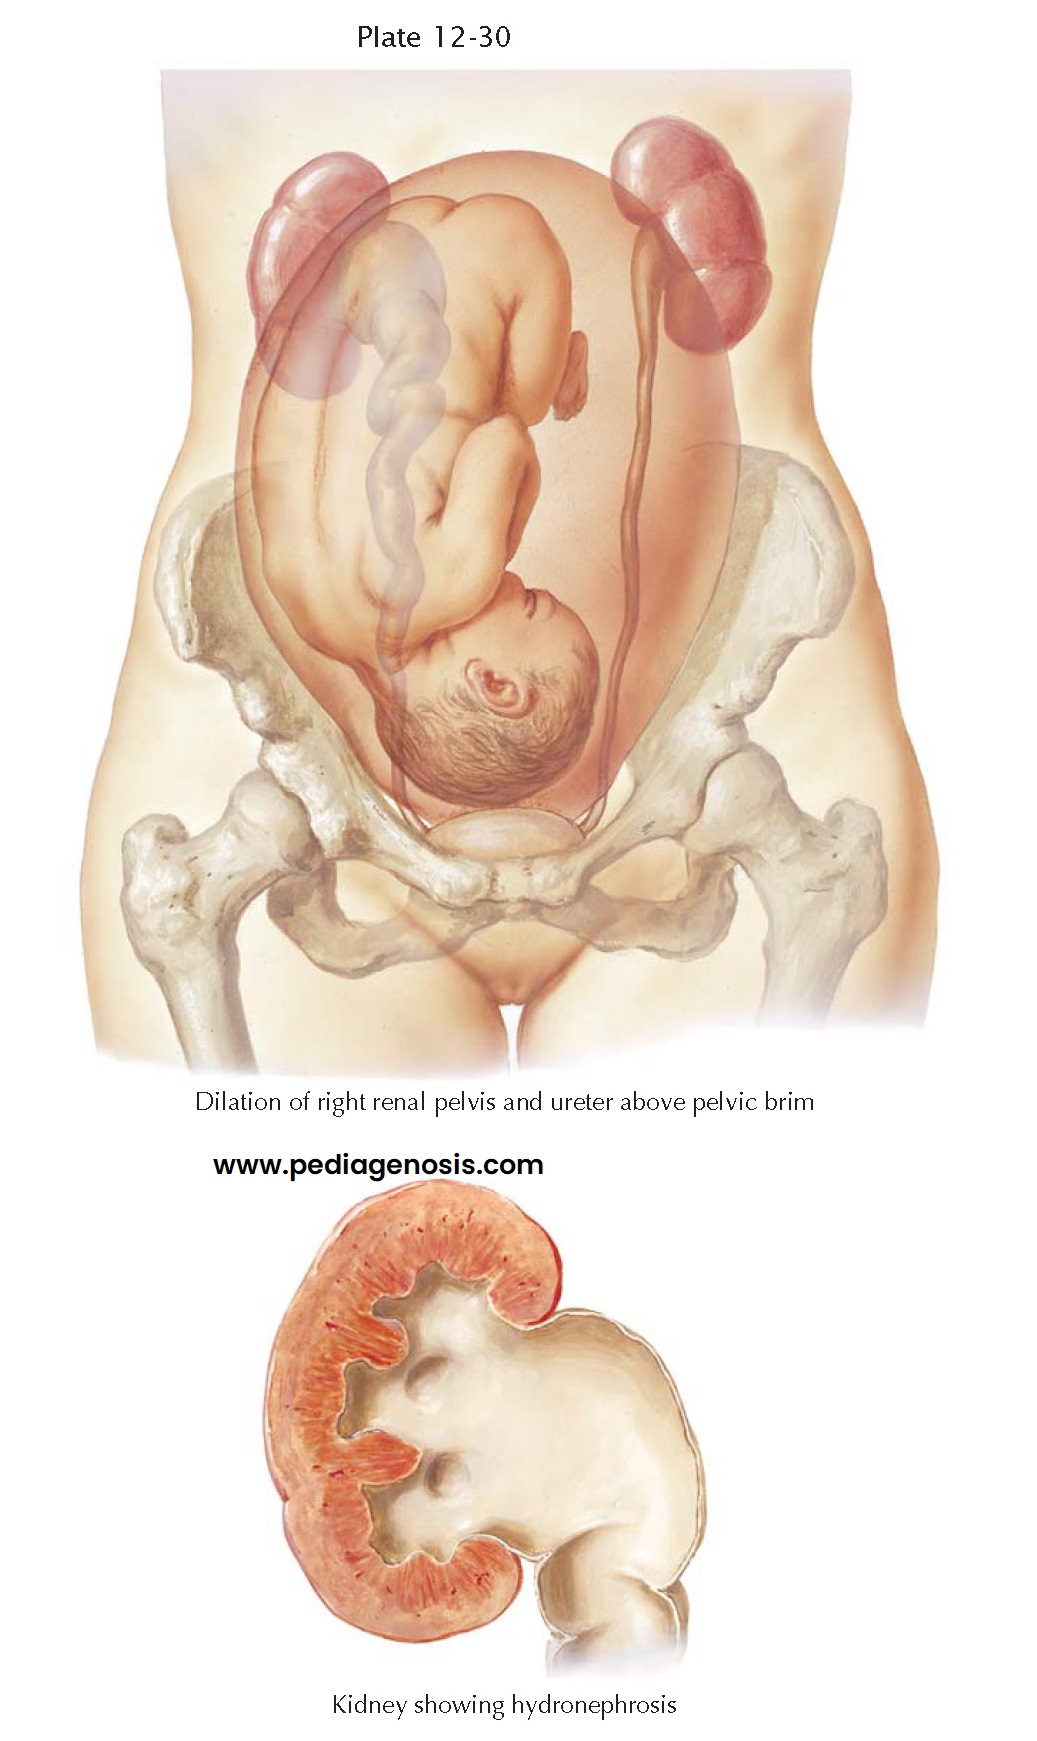 URINARY COMPLICATIONS OF PREGNANCY